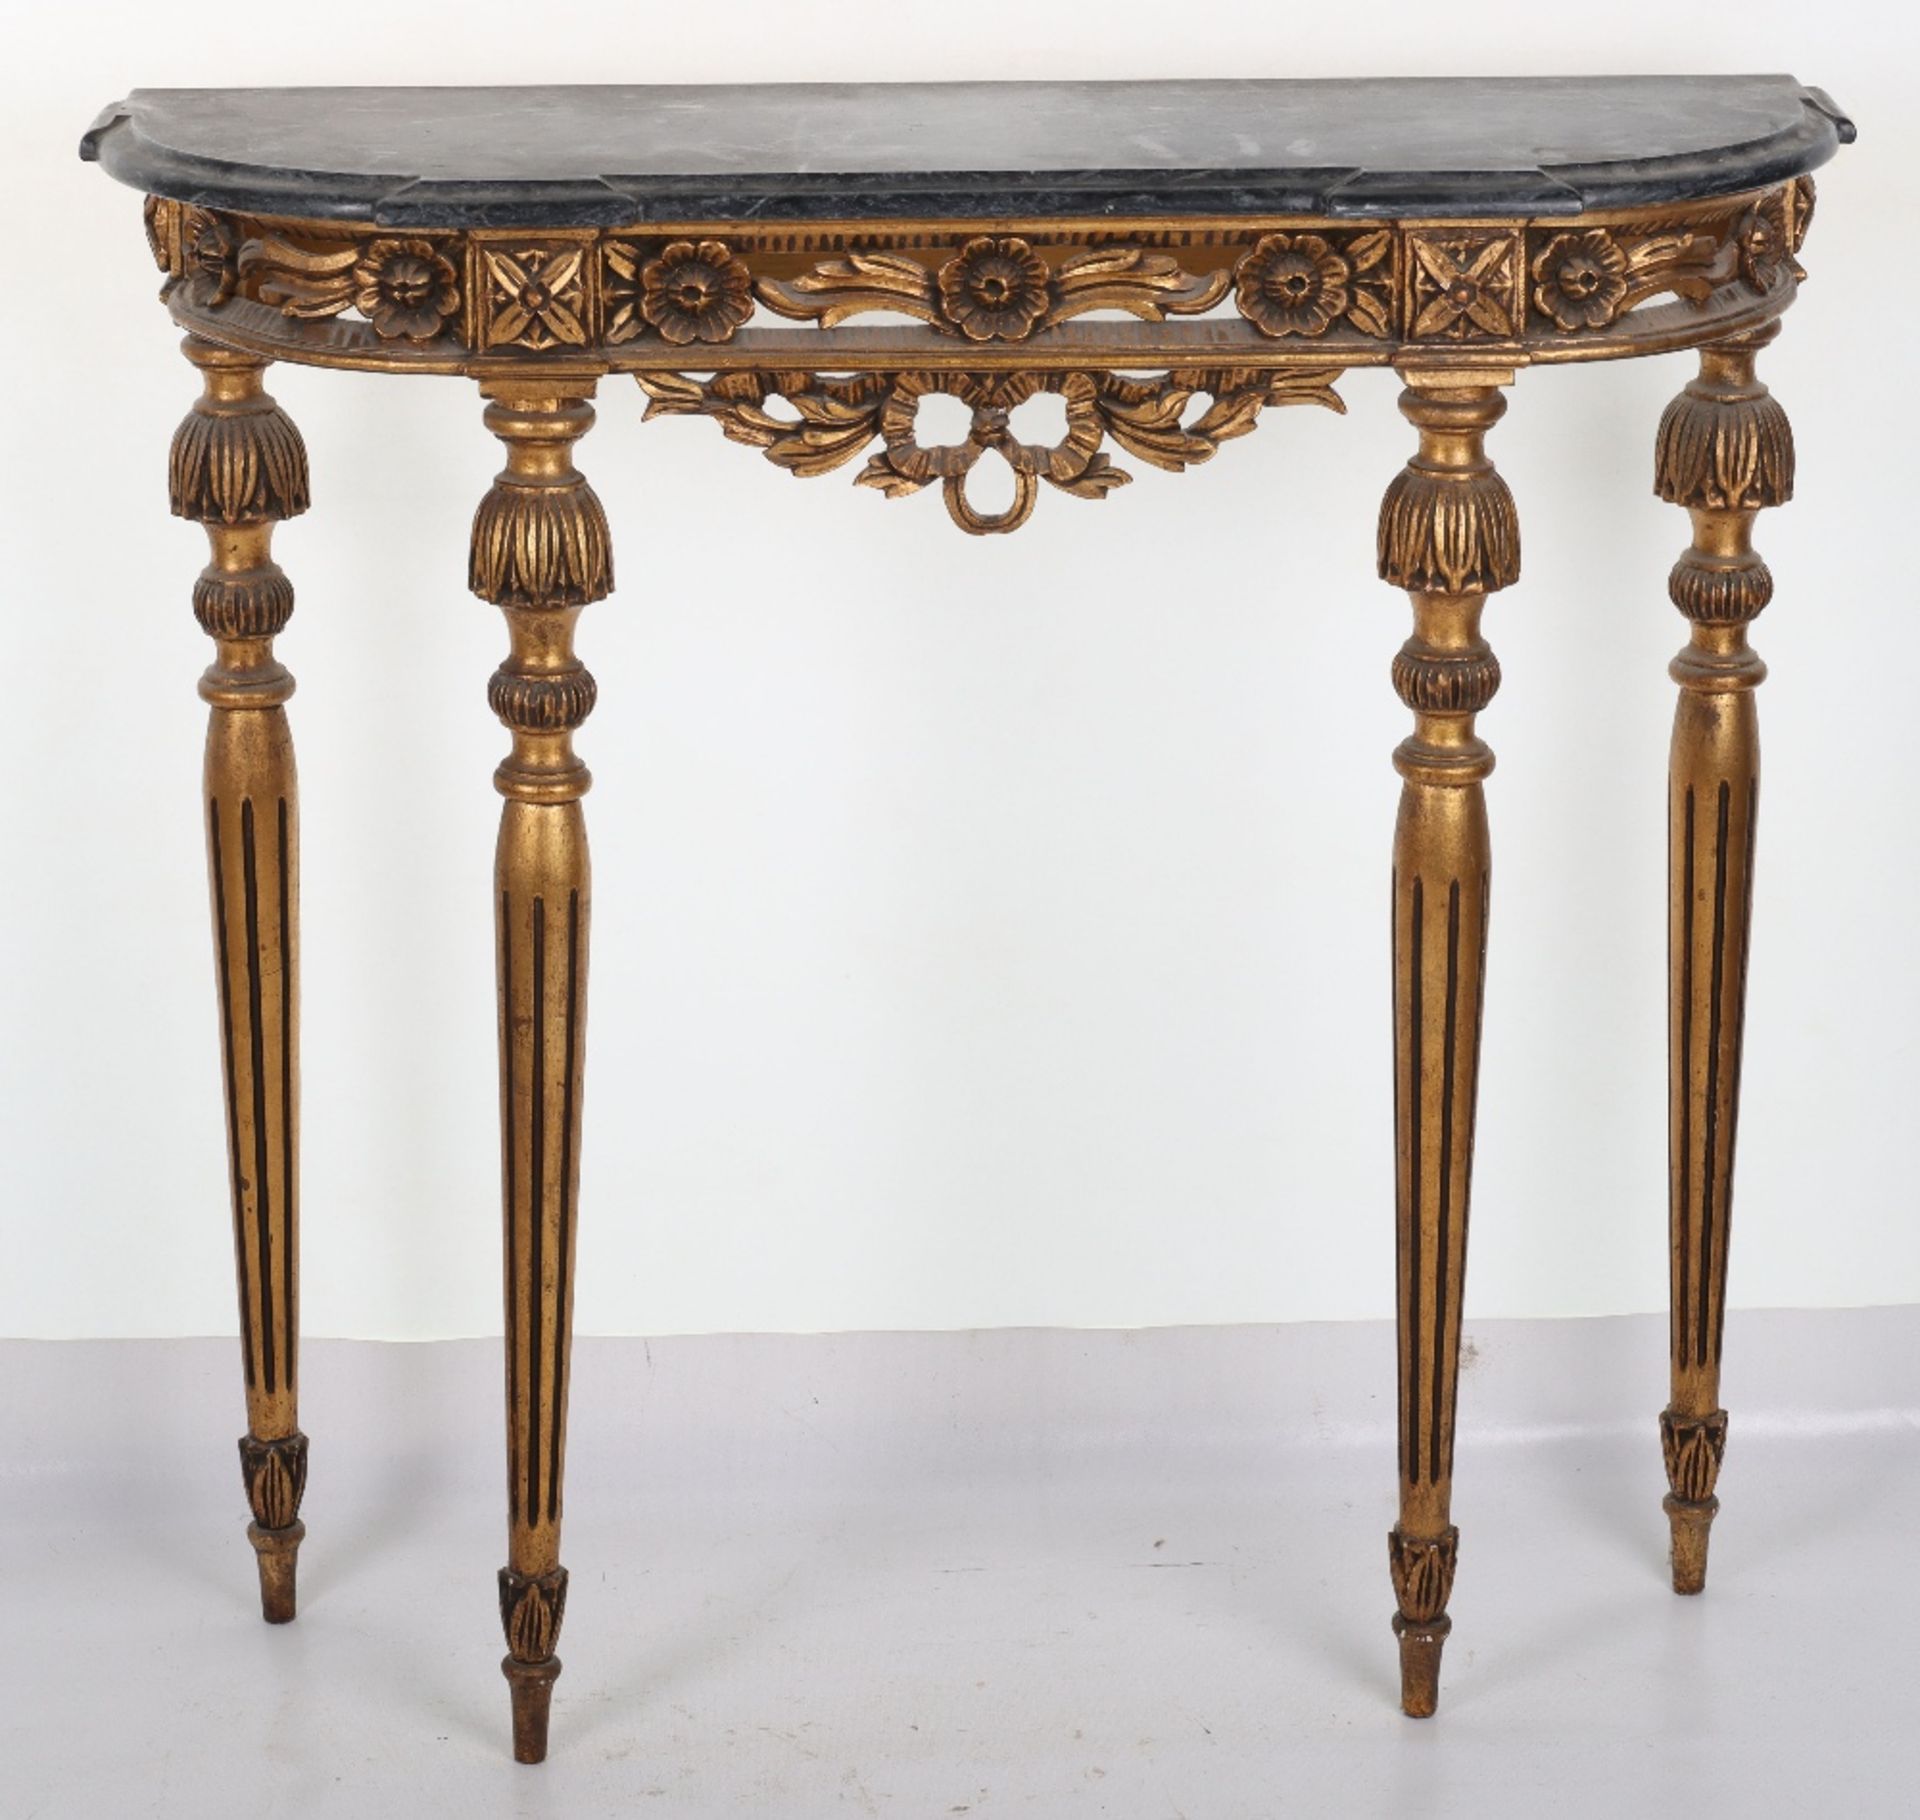 A French giltwood and marble top console table